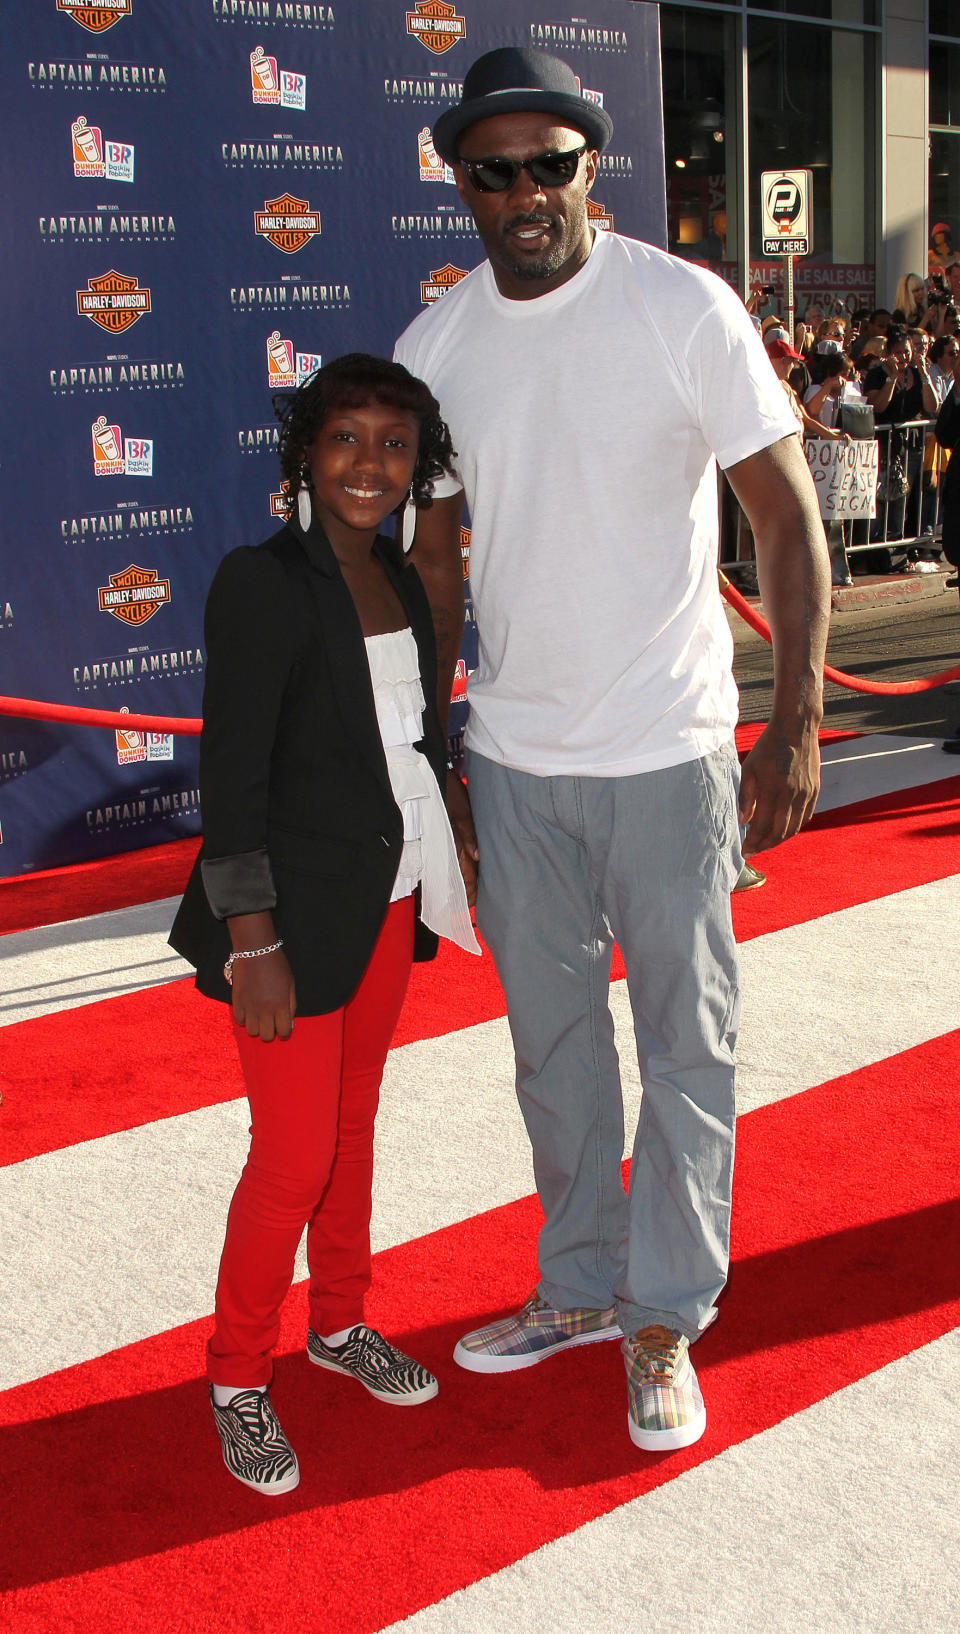 HOLLYWOOD, CA - JULY 19: Actor Idris Elba (R) and his daughter attend the 'Captain America: The First Avenger' Los Angeles Premiere at the El Capitan Theater on July 19, 2011 in Hollywood, California.  (Photo by Frederick M. Brown/Getty Images)